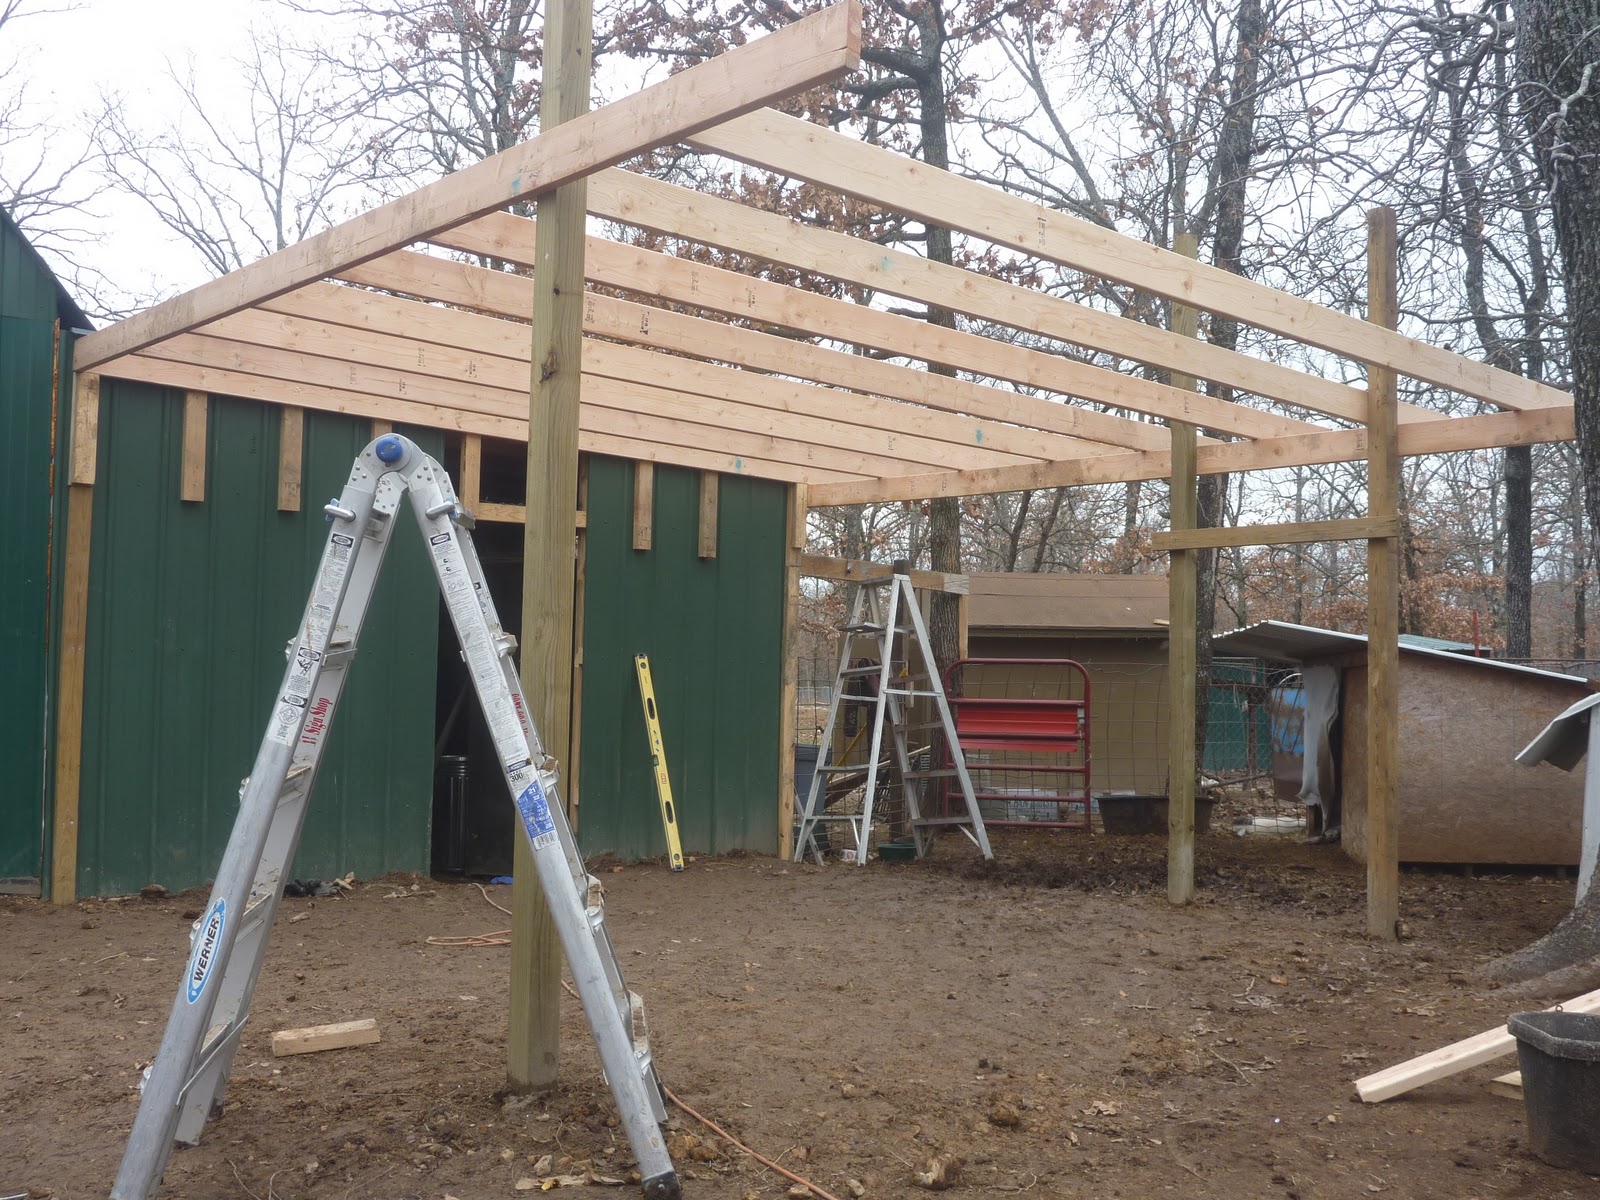 seven acre ranch: part 2 of building a loafing shed